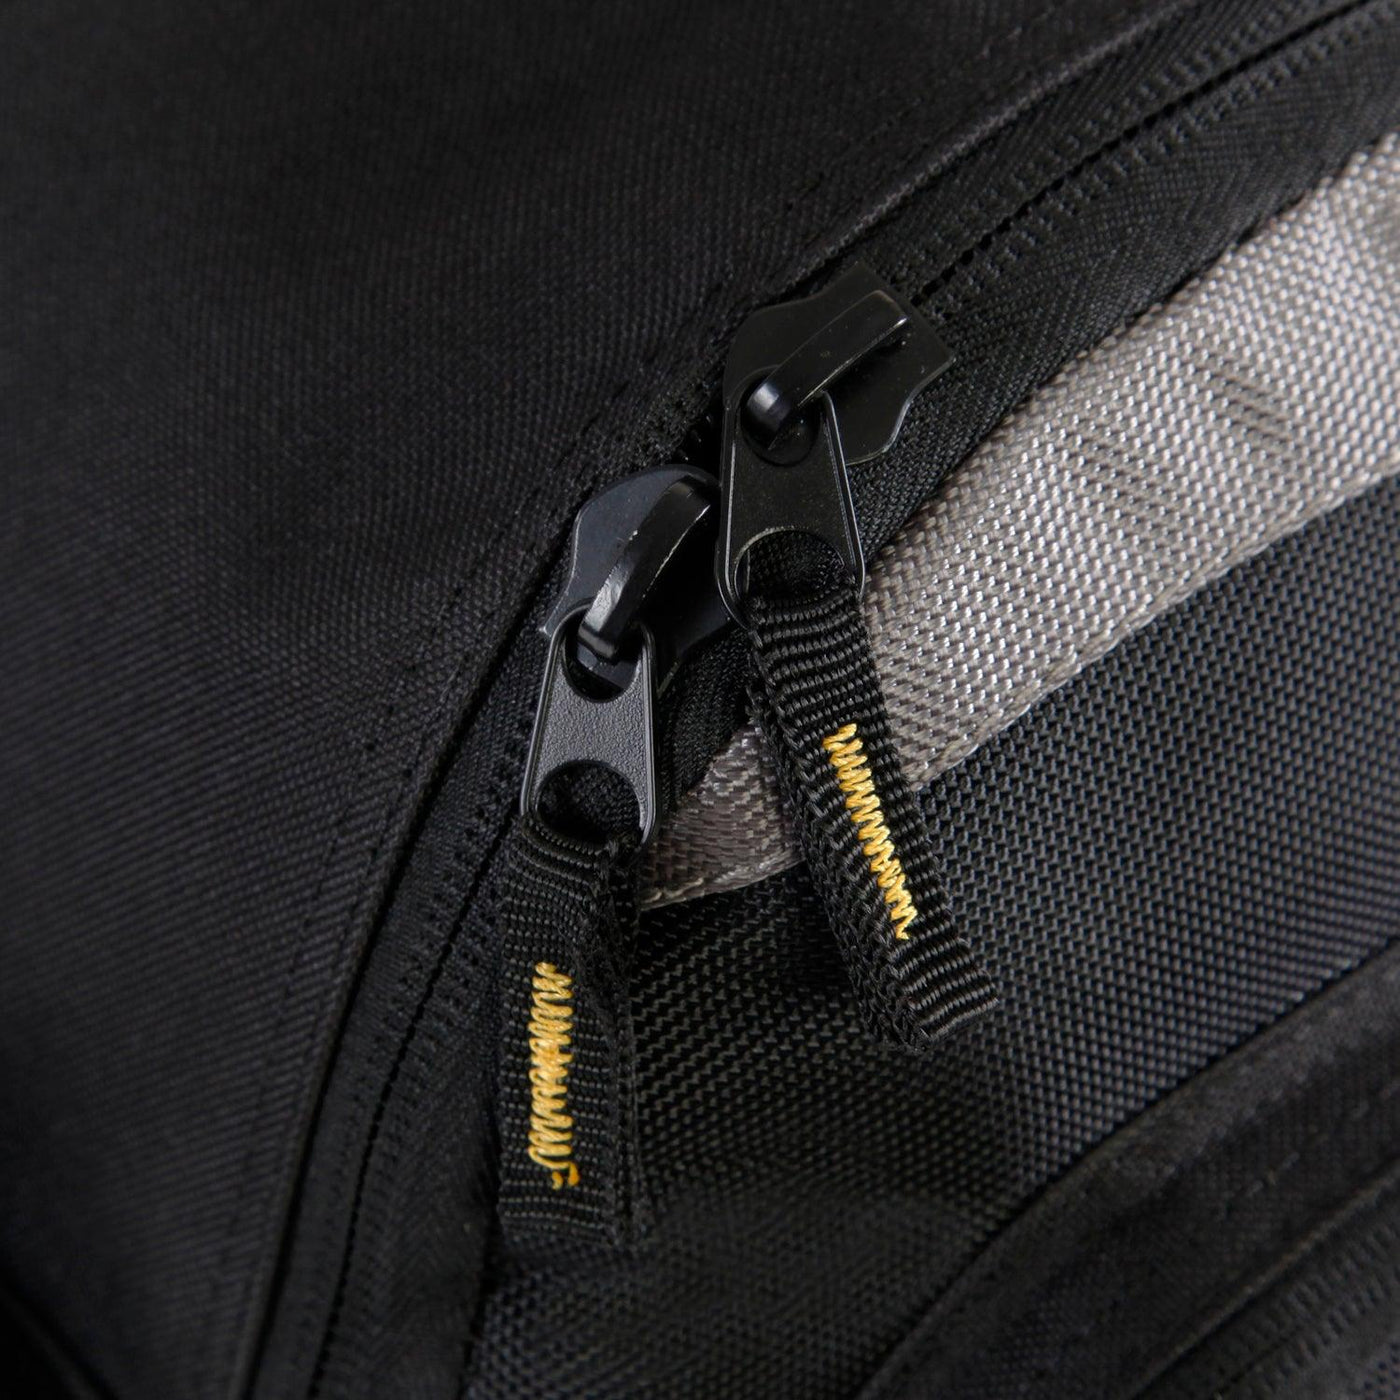 Zippers on backpack